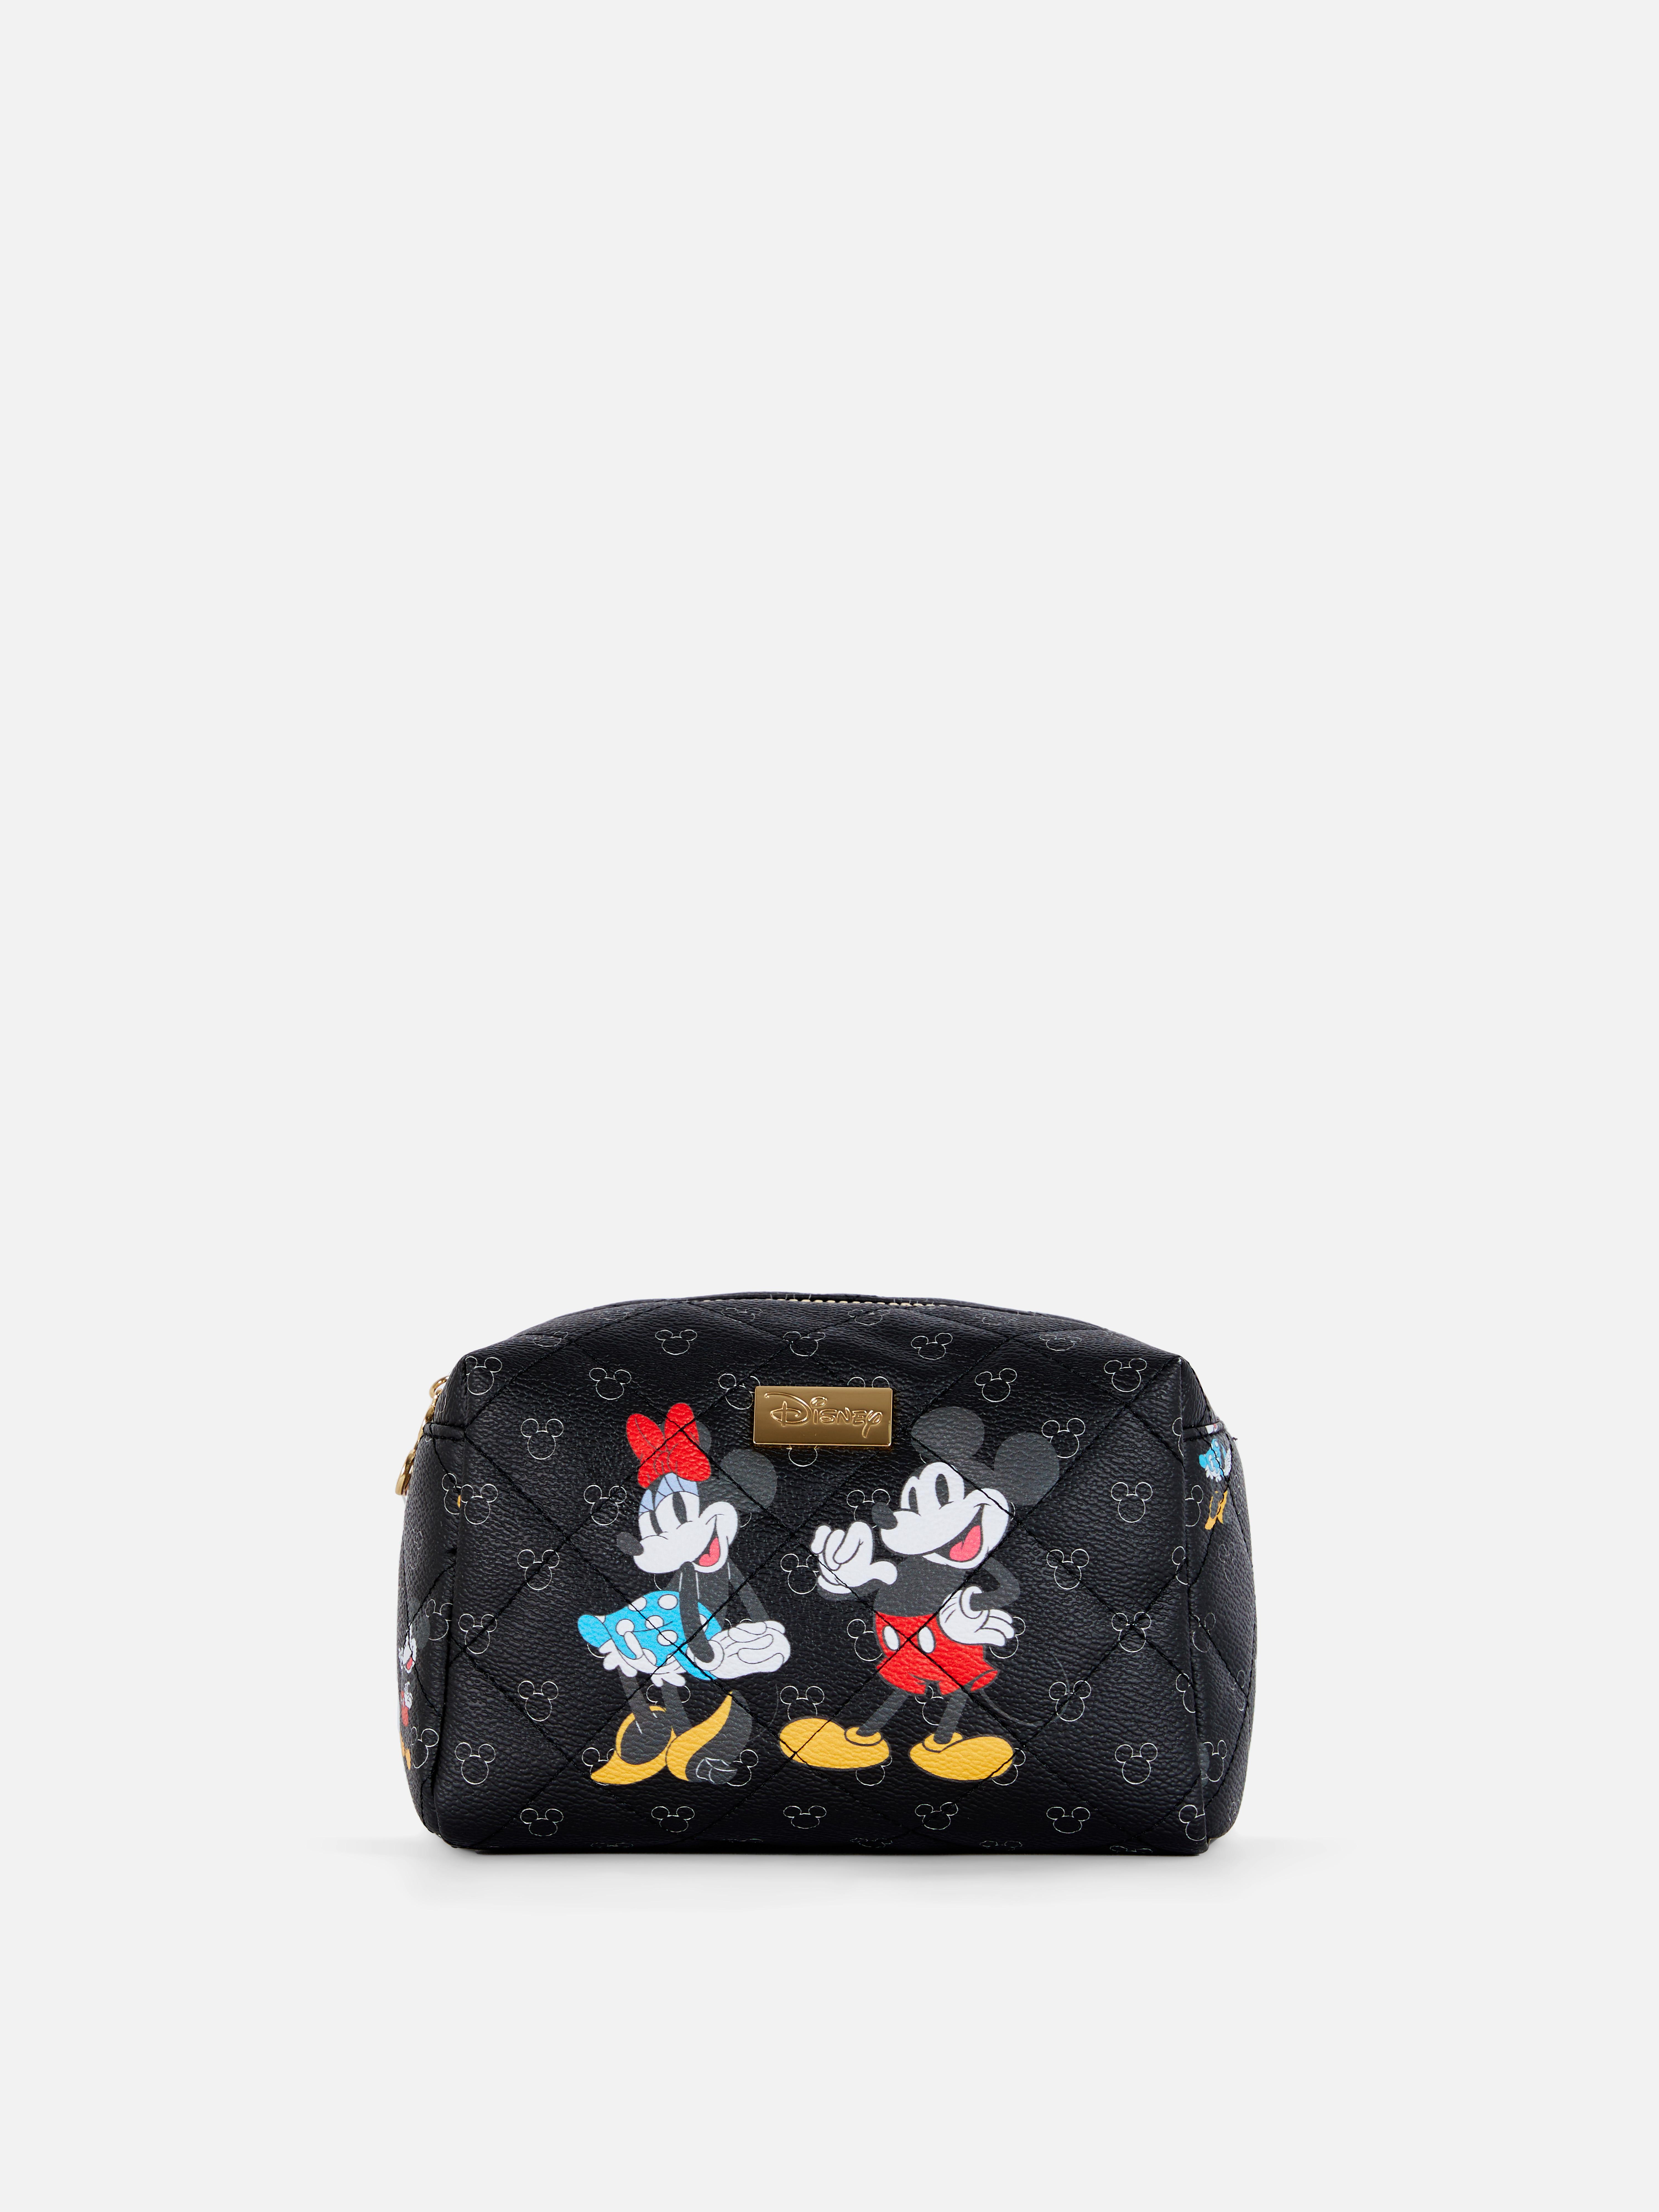 Disney's Mickey and Minnie Mouse Monogram Makeup Bag